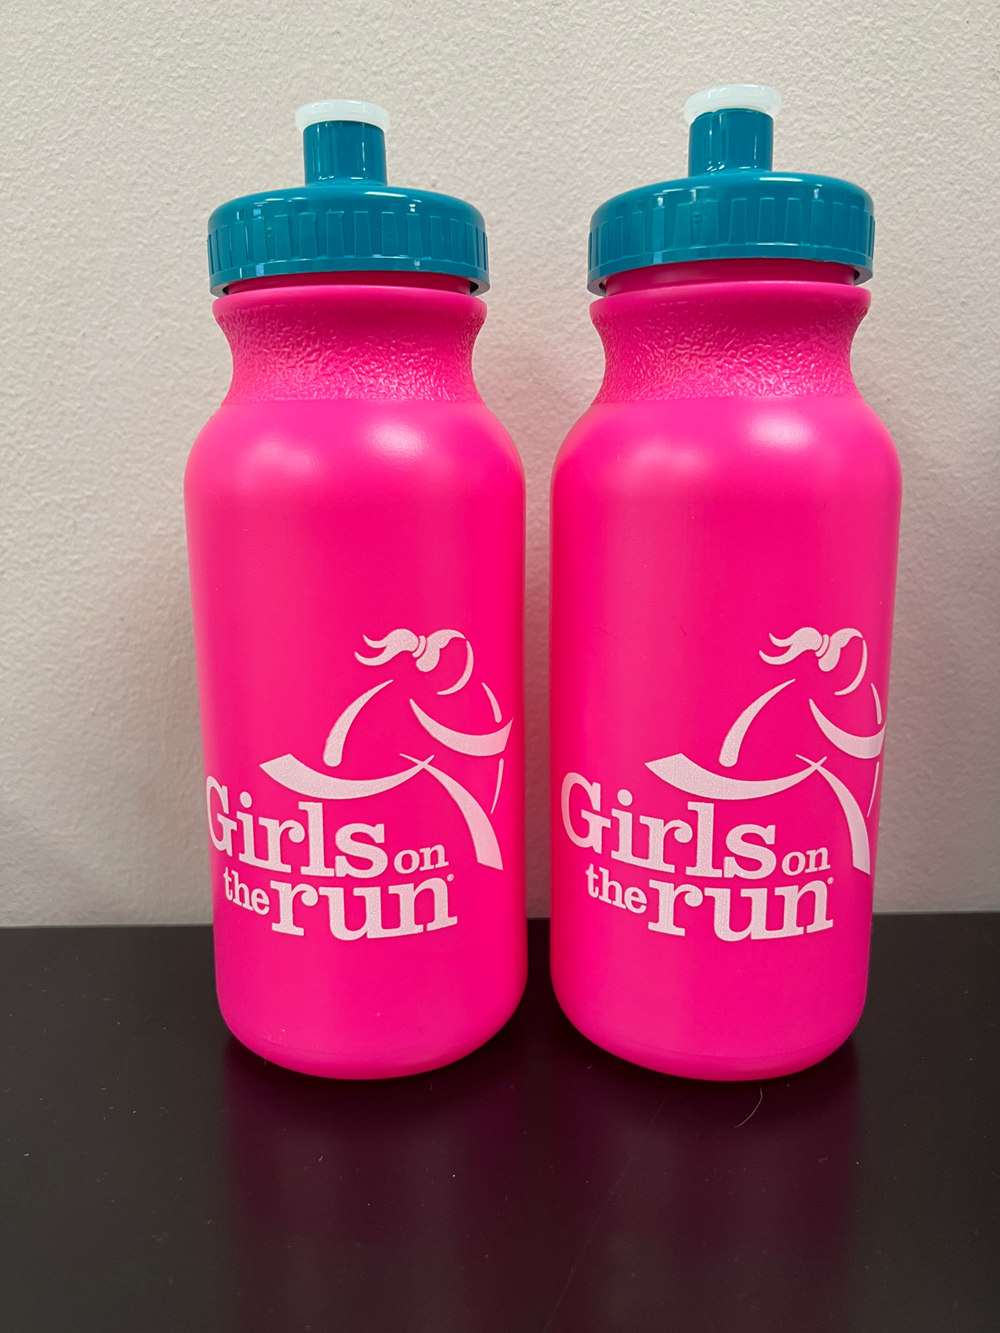 two pink water bottles with white text